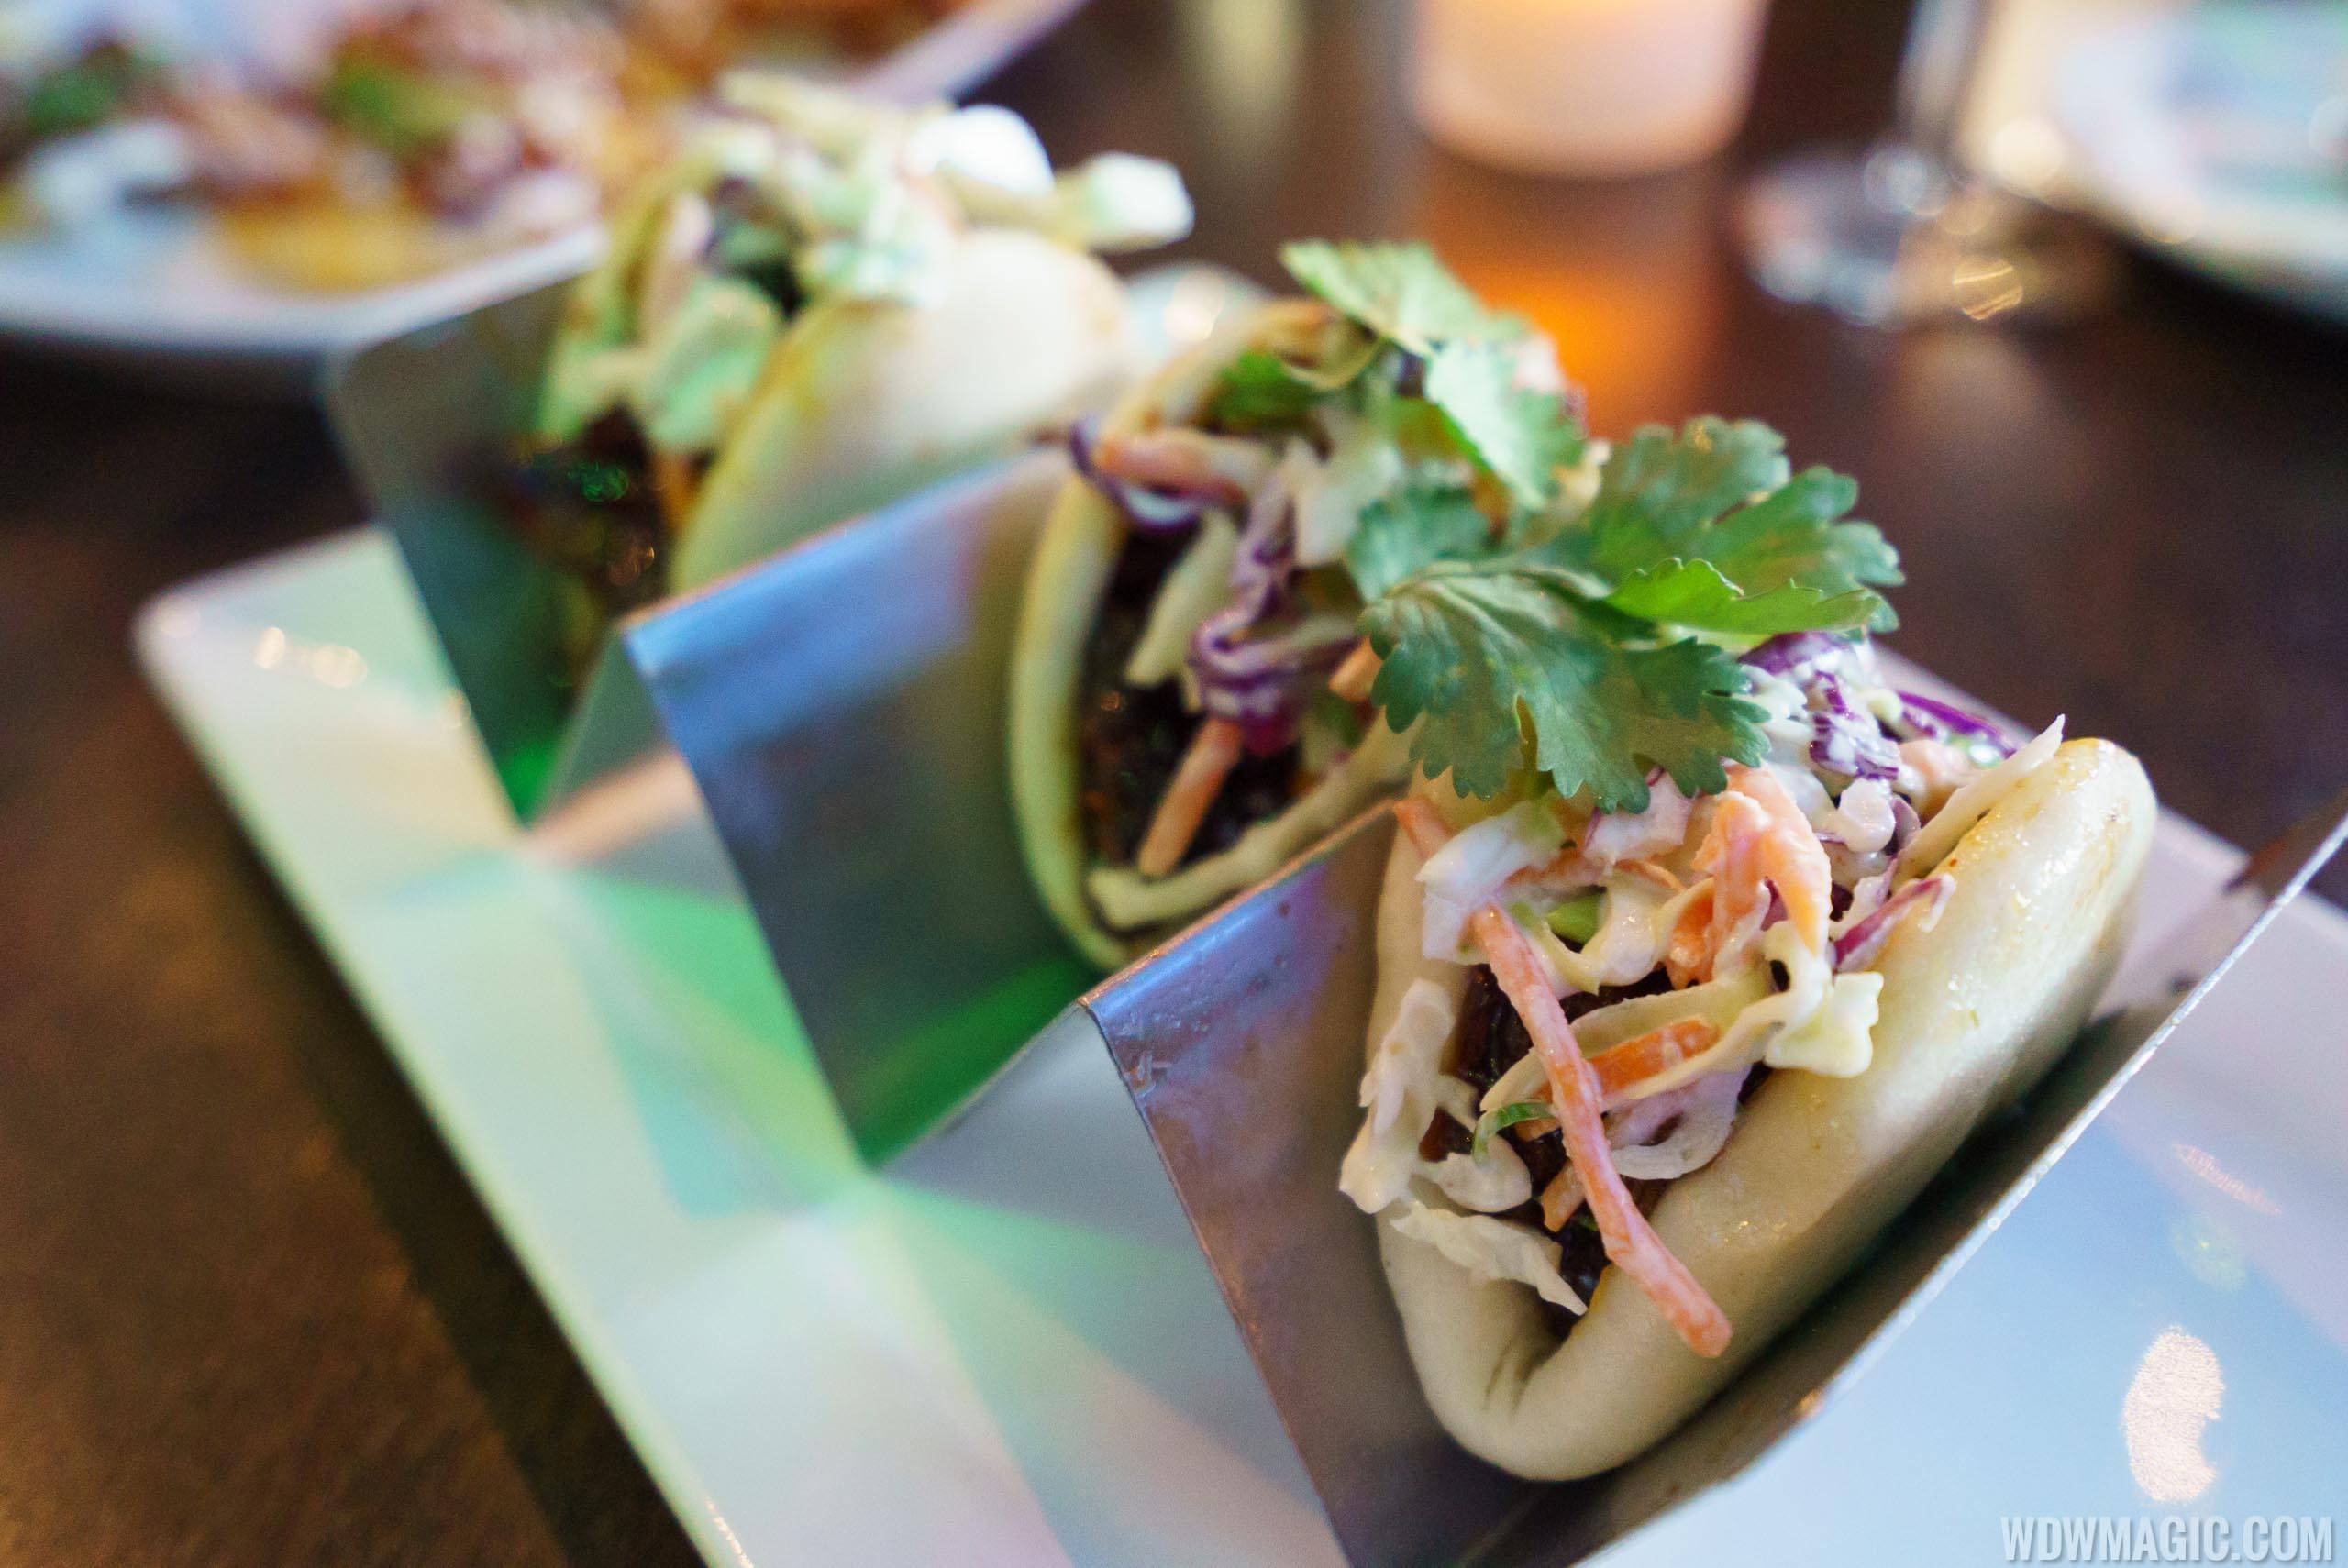 Chinese BBQ Pork - $13.99 Soft, steamed buns filled with Chinese BBQ pork, slaw and spicy Sriracha sauce